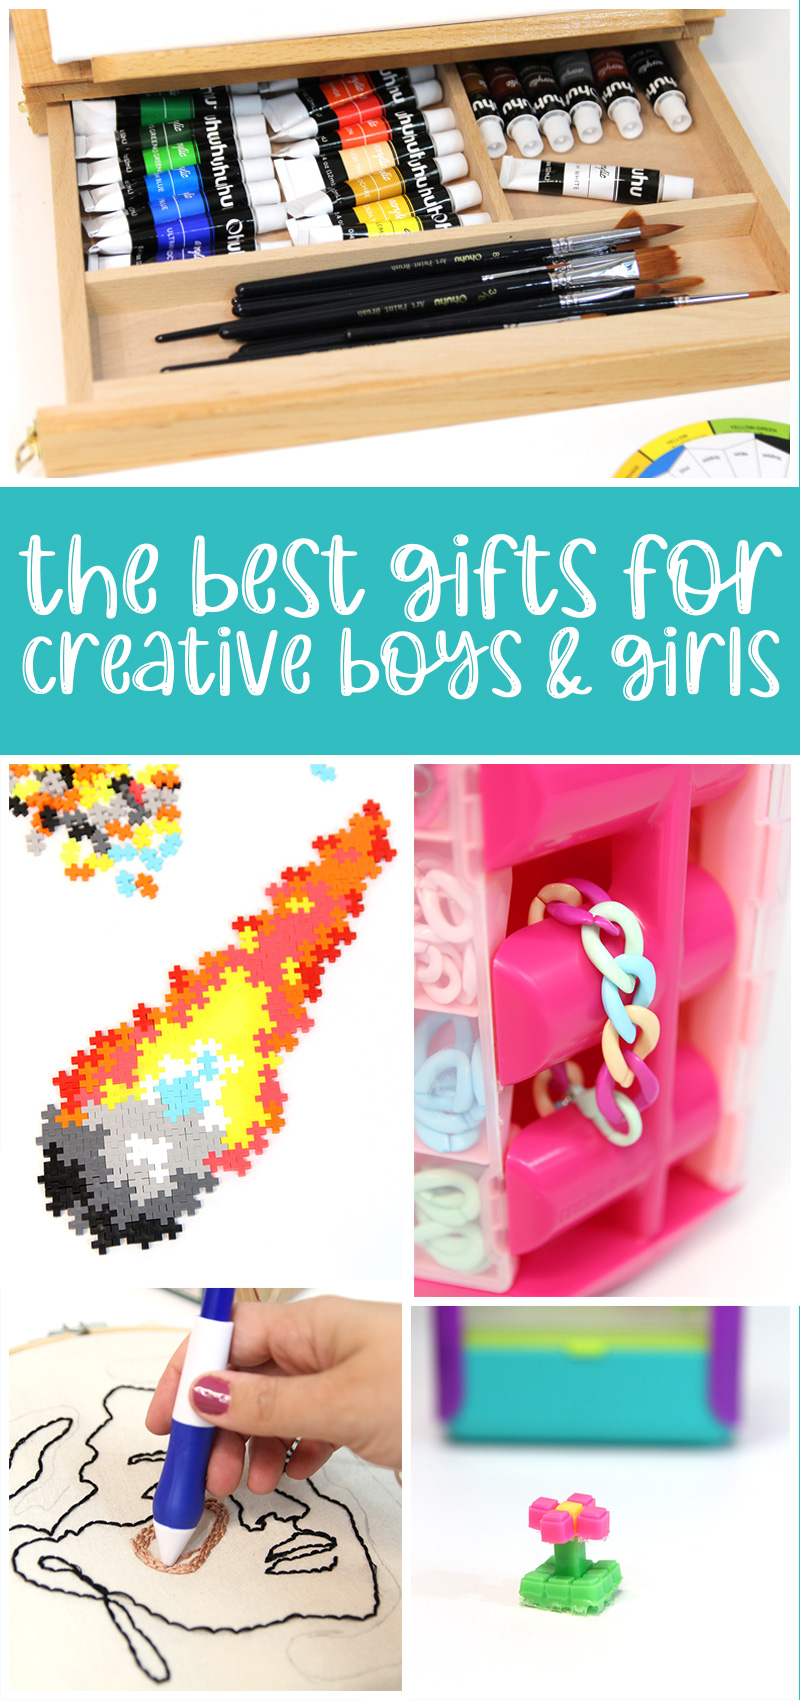 Gifts for Creative Kids Who Like to Design and Build - One Time Through